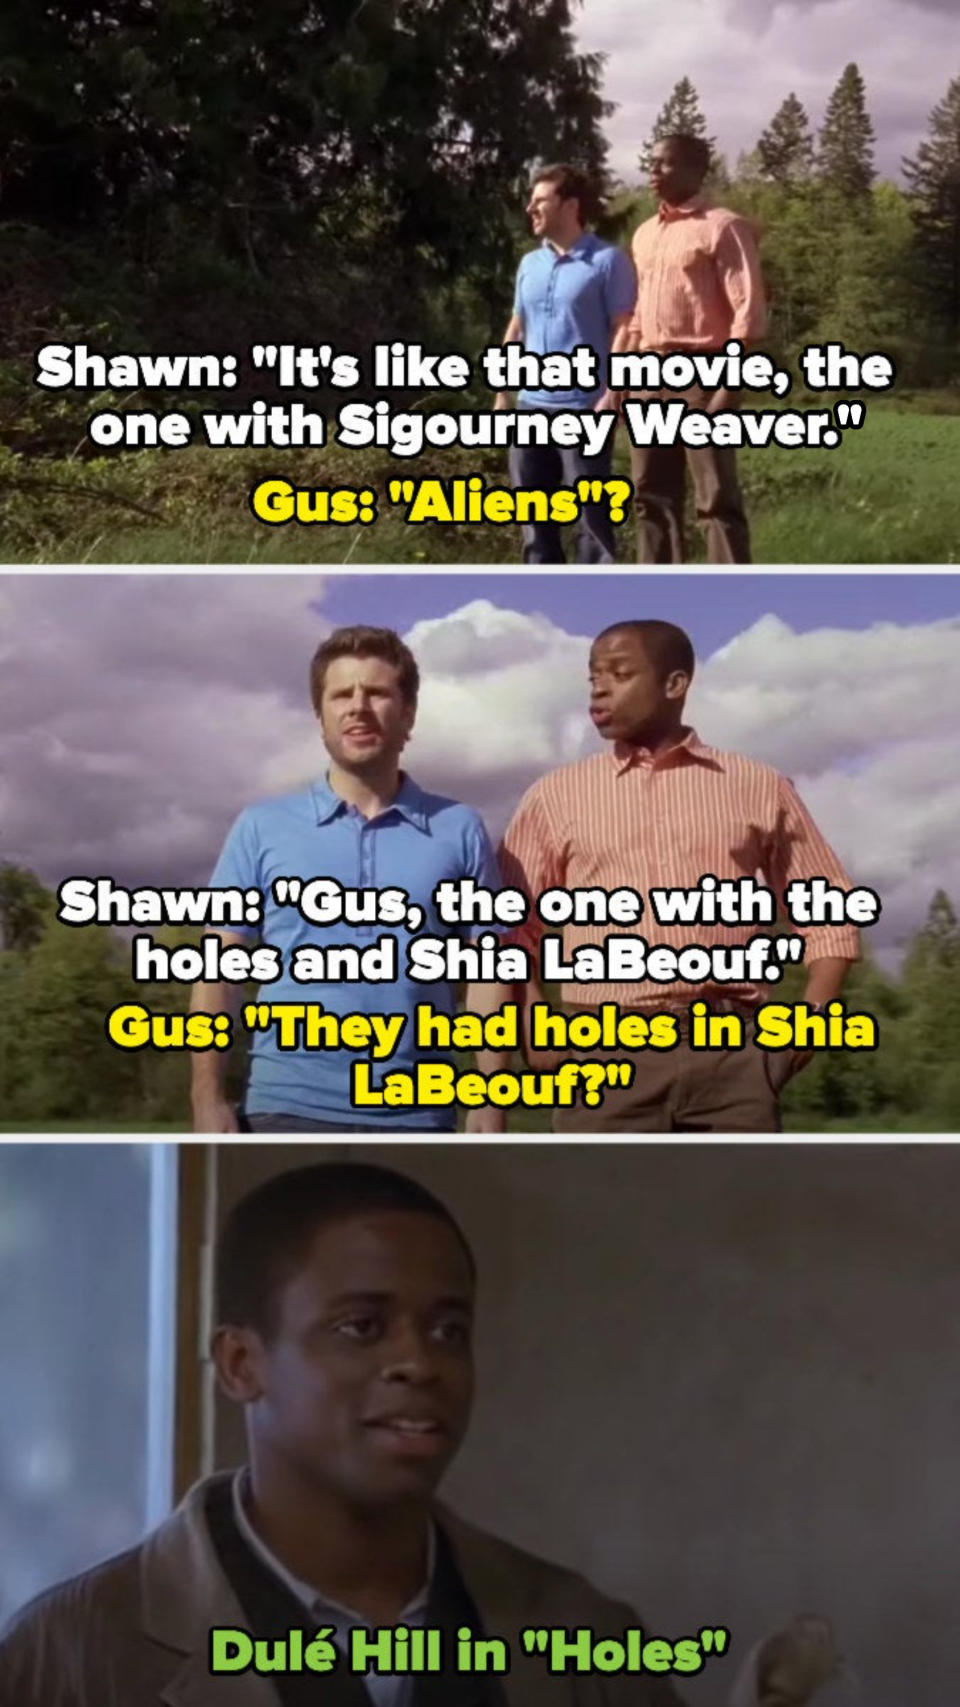 Shawn tries to get Gus to remember "Holes," calling it the movie with Sigourney Weaver and Shia LaBeouf, but Gus can't remember — that's because the actor was in "Holes" as Sam